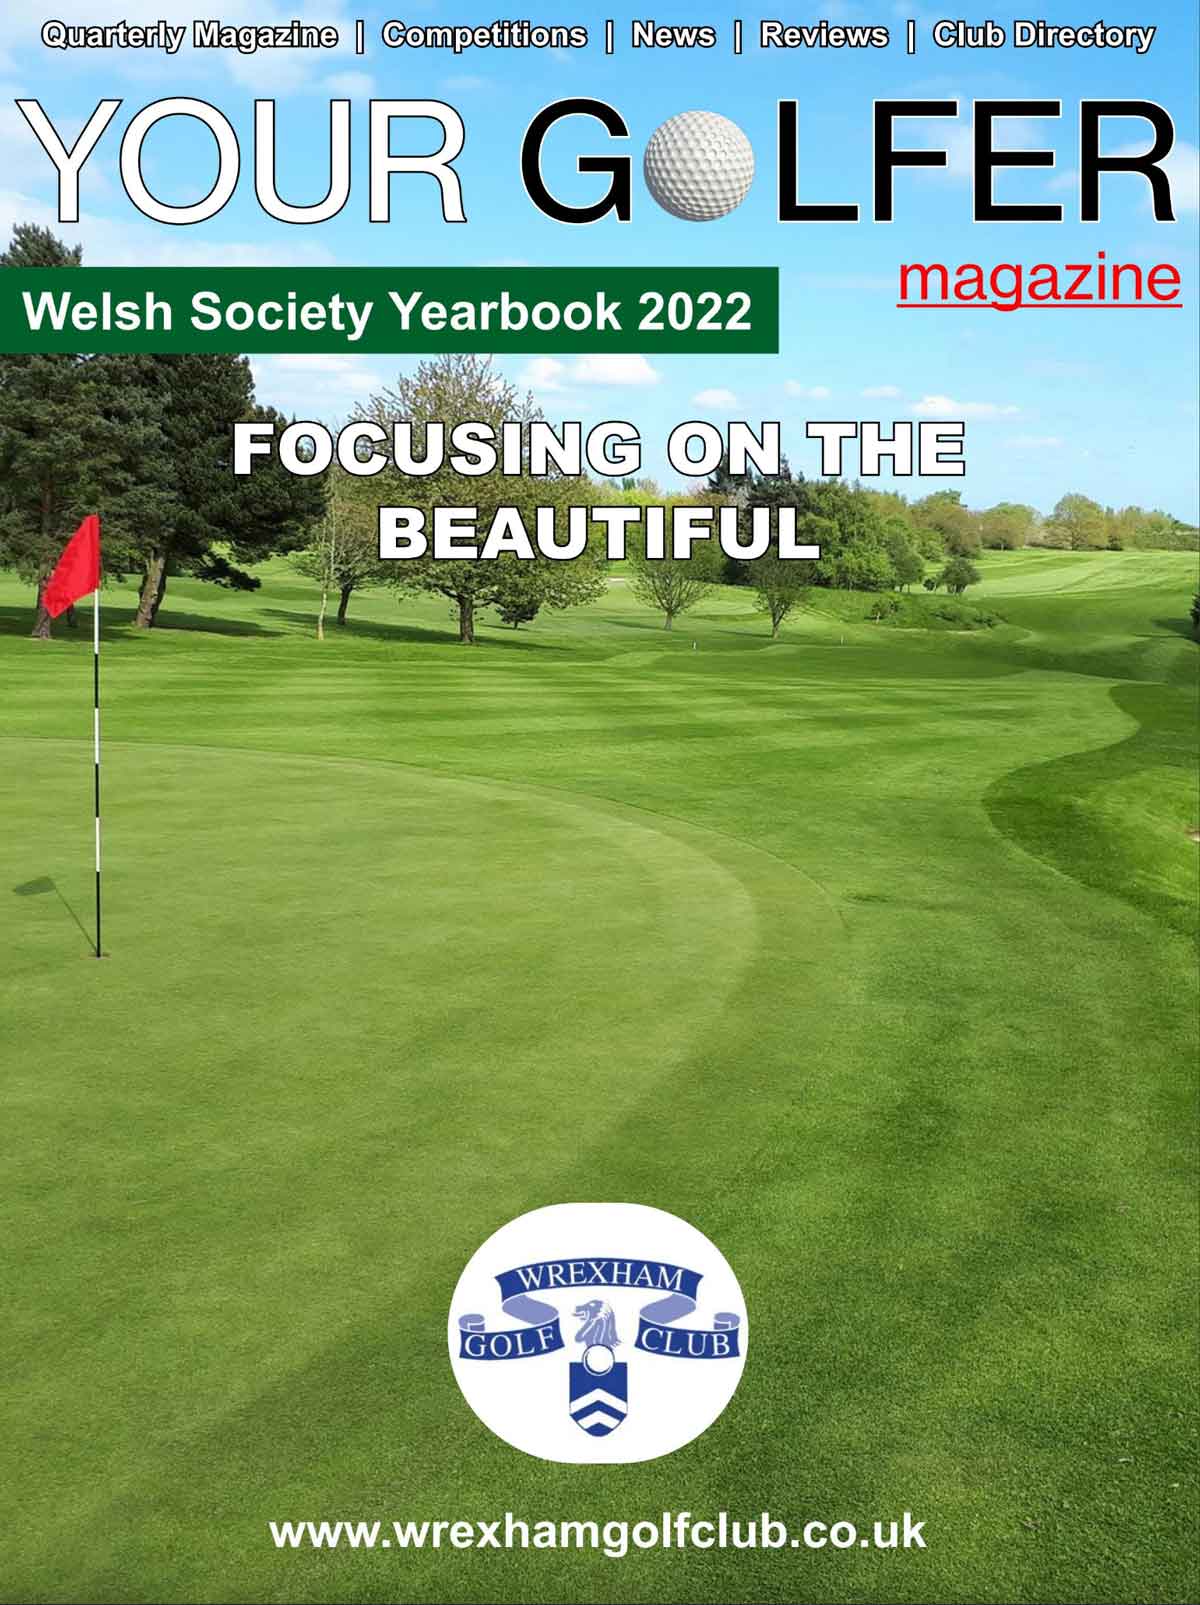 Welsh Year Book 2022 from Your Golfer Magazine